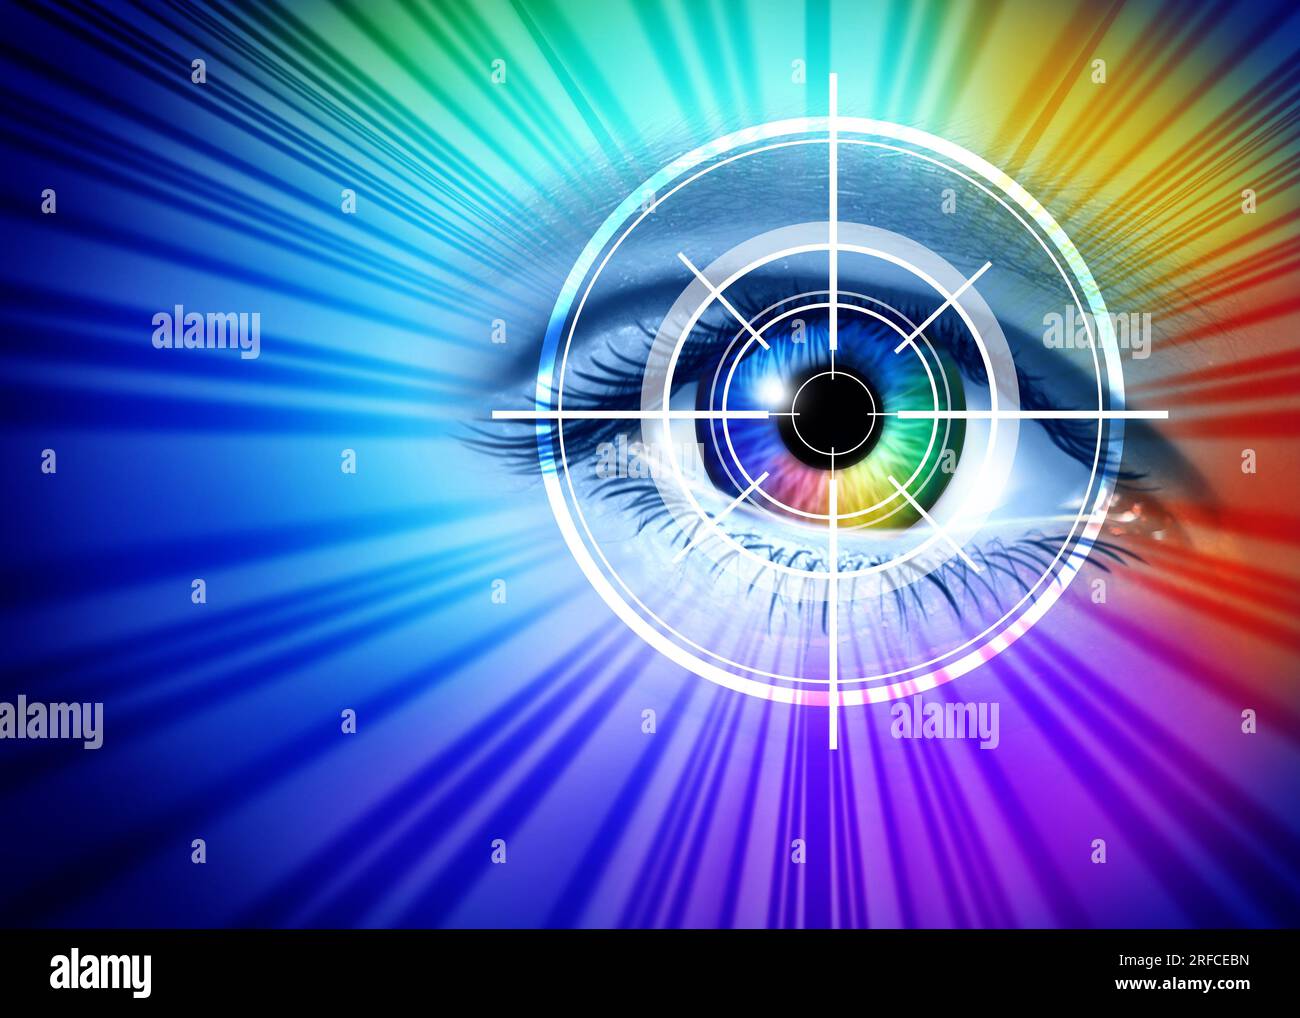 Iris Scanning and eye recognition or retinal scan as a biometric identification for identity security identifying patterns in human eyes as authentica Stock Photo